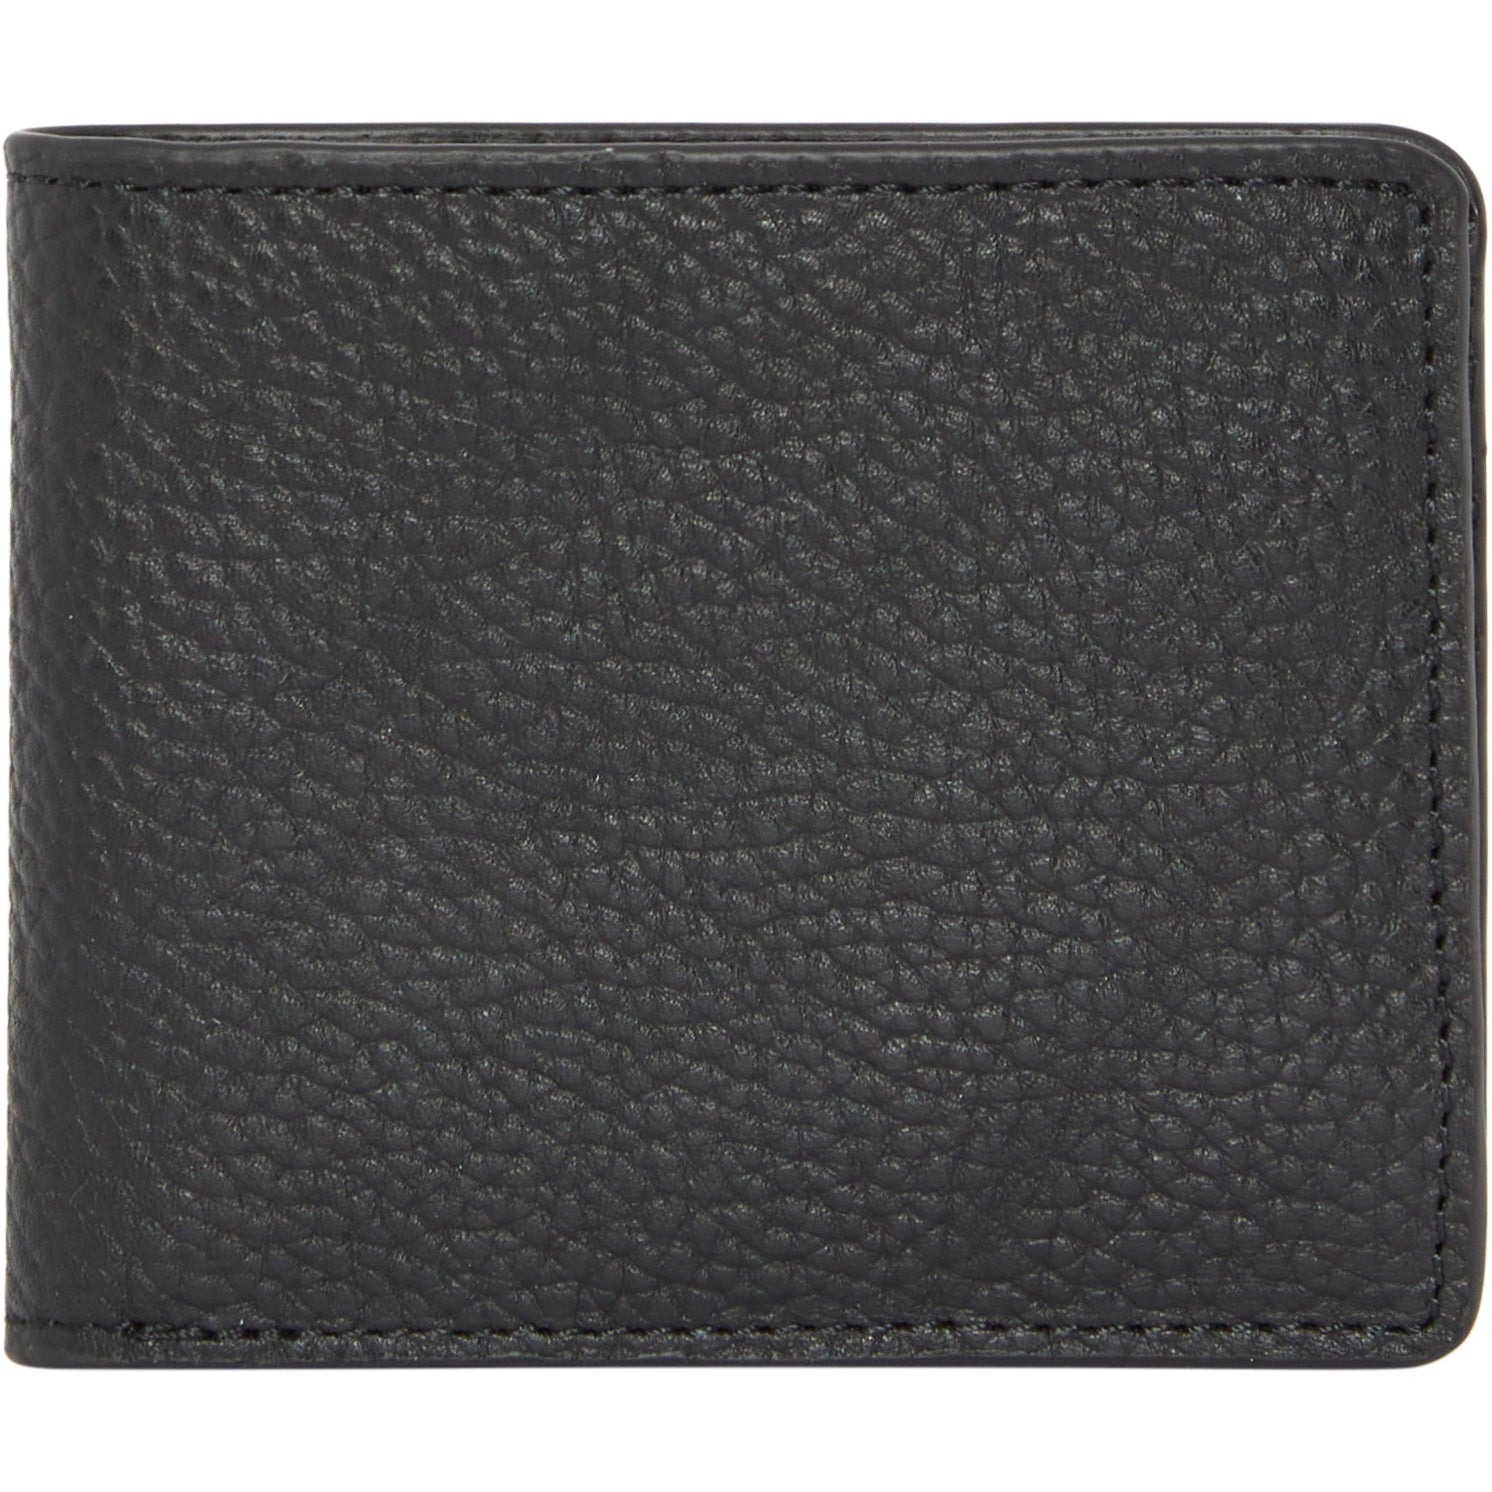 Men's Black Leather Wallet Brix and Bailey at Sostter